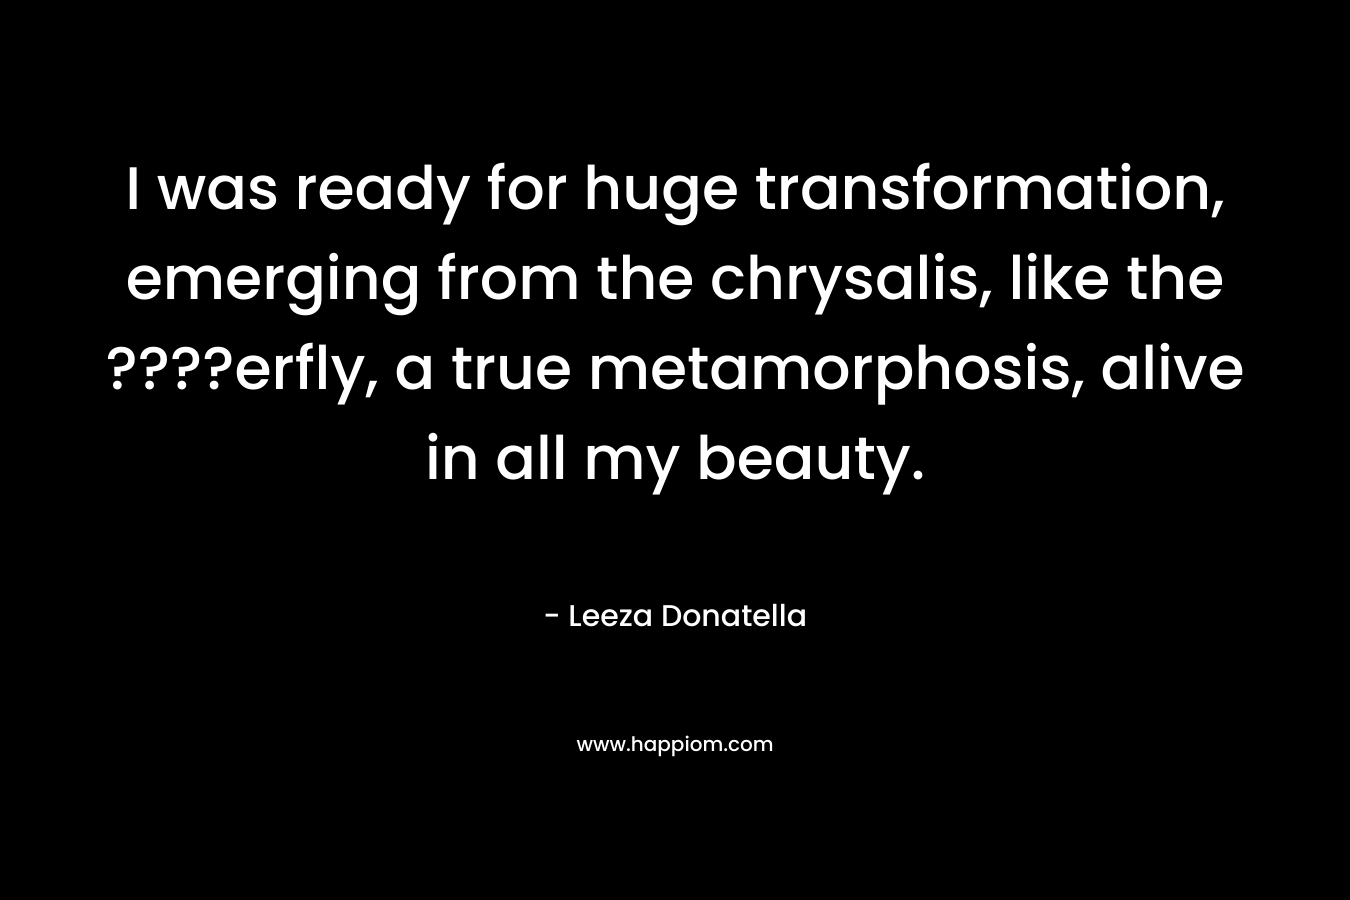 I was ready for huge transformation, emerging from the chrysalis, like the ????erfly, a true metamorphosis, alive in all my beauty. – Leeza Donatella